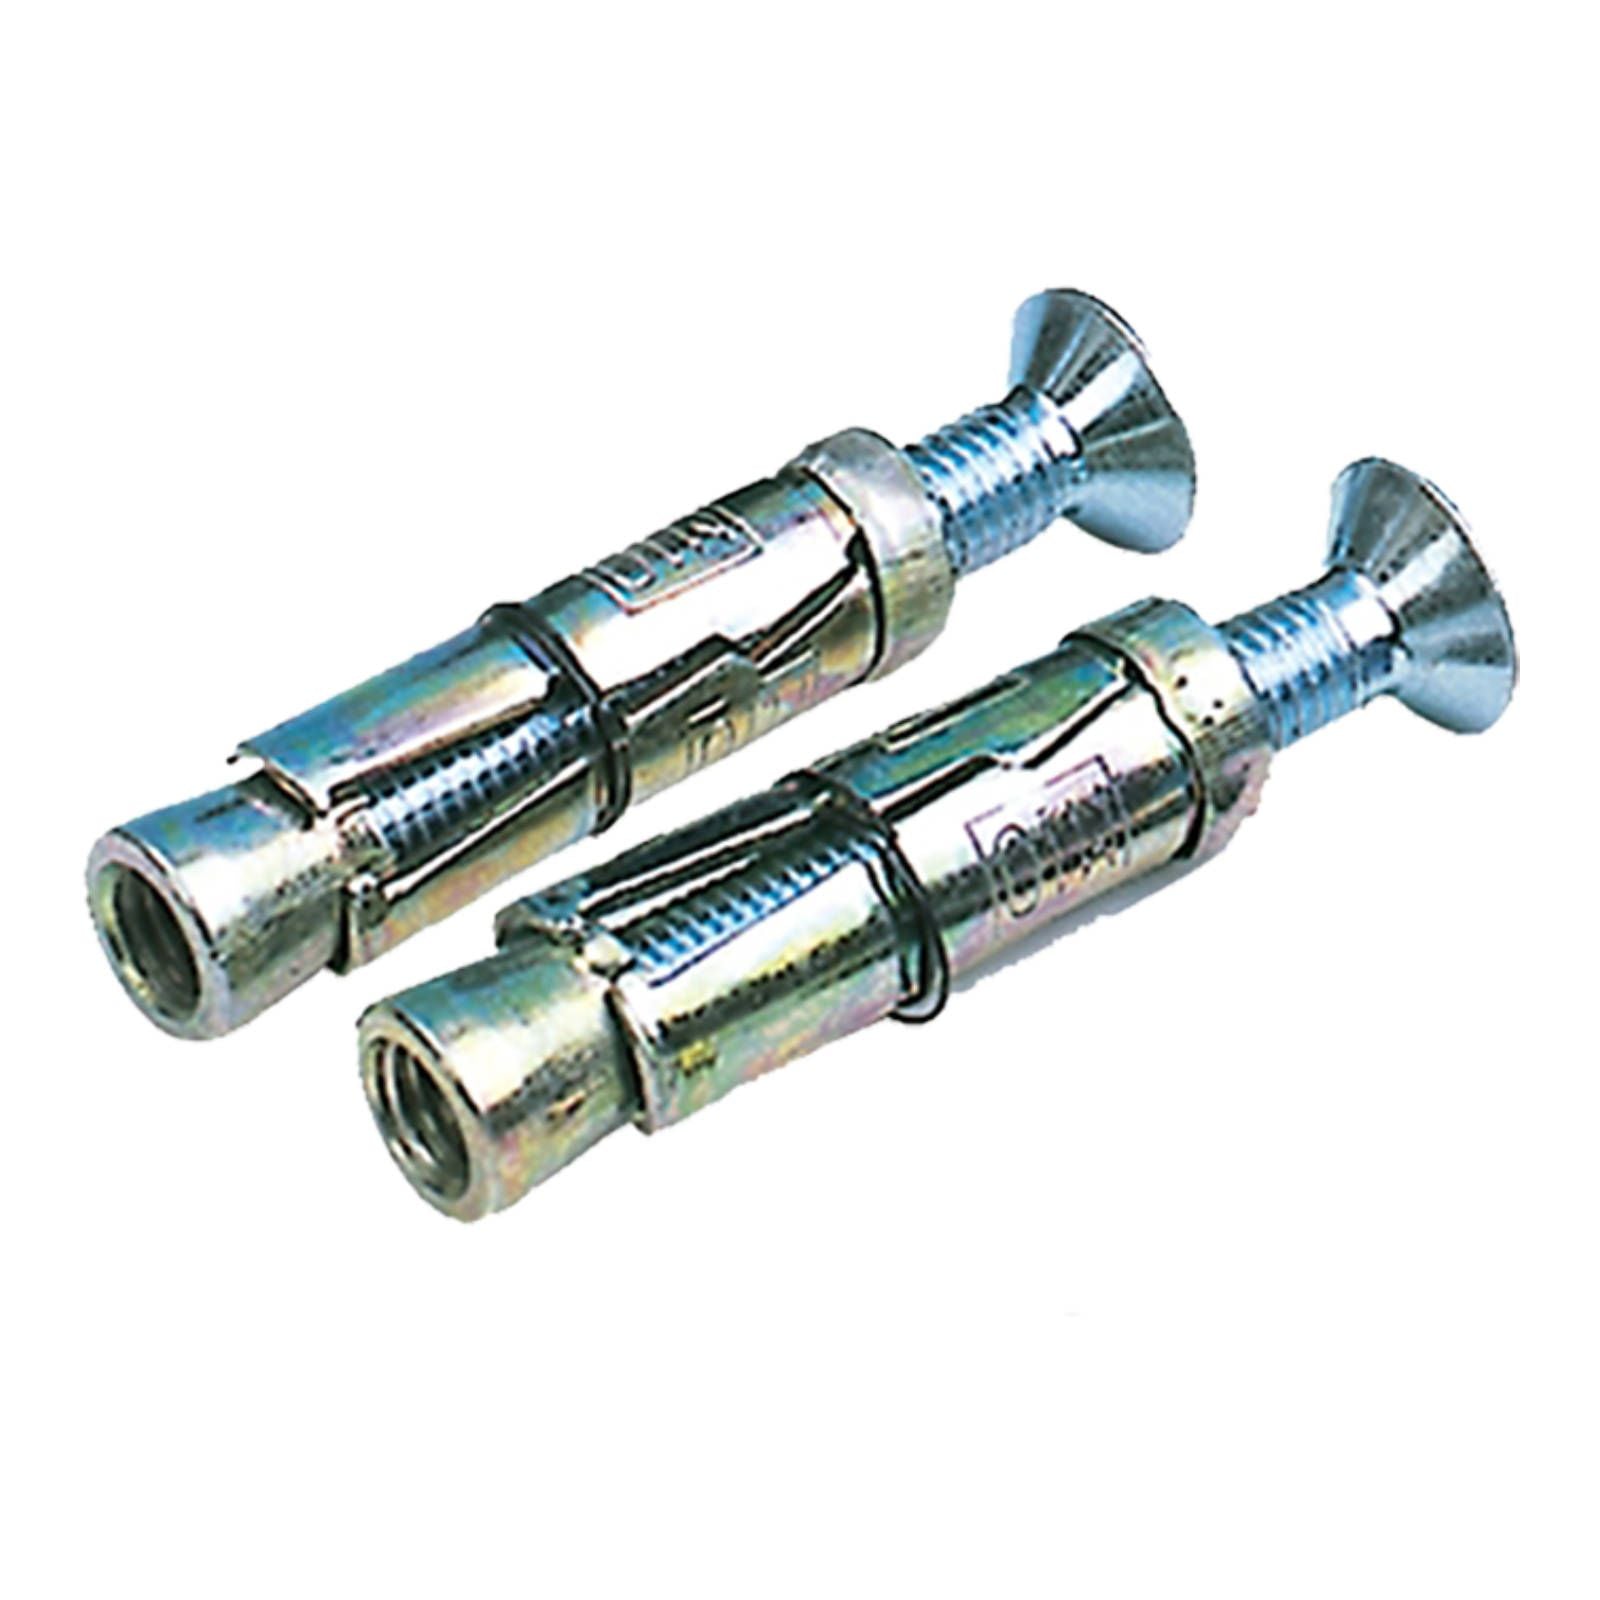 New OXFORD Ground Anchor Replacement Bolt - Bruteforce (2 Pack) #OXLK397B